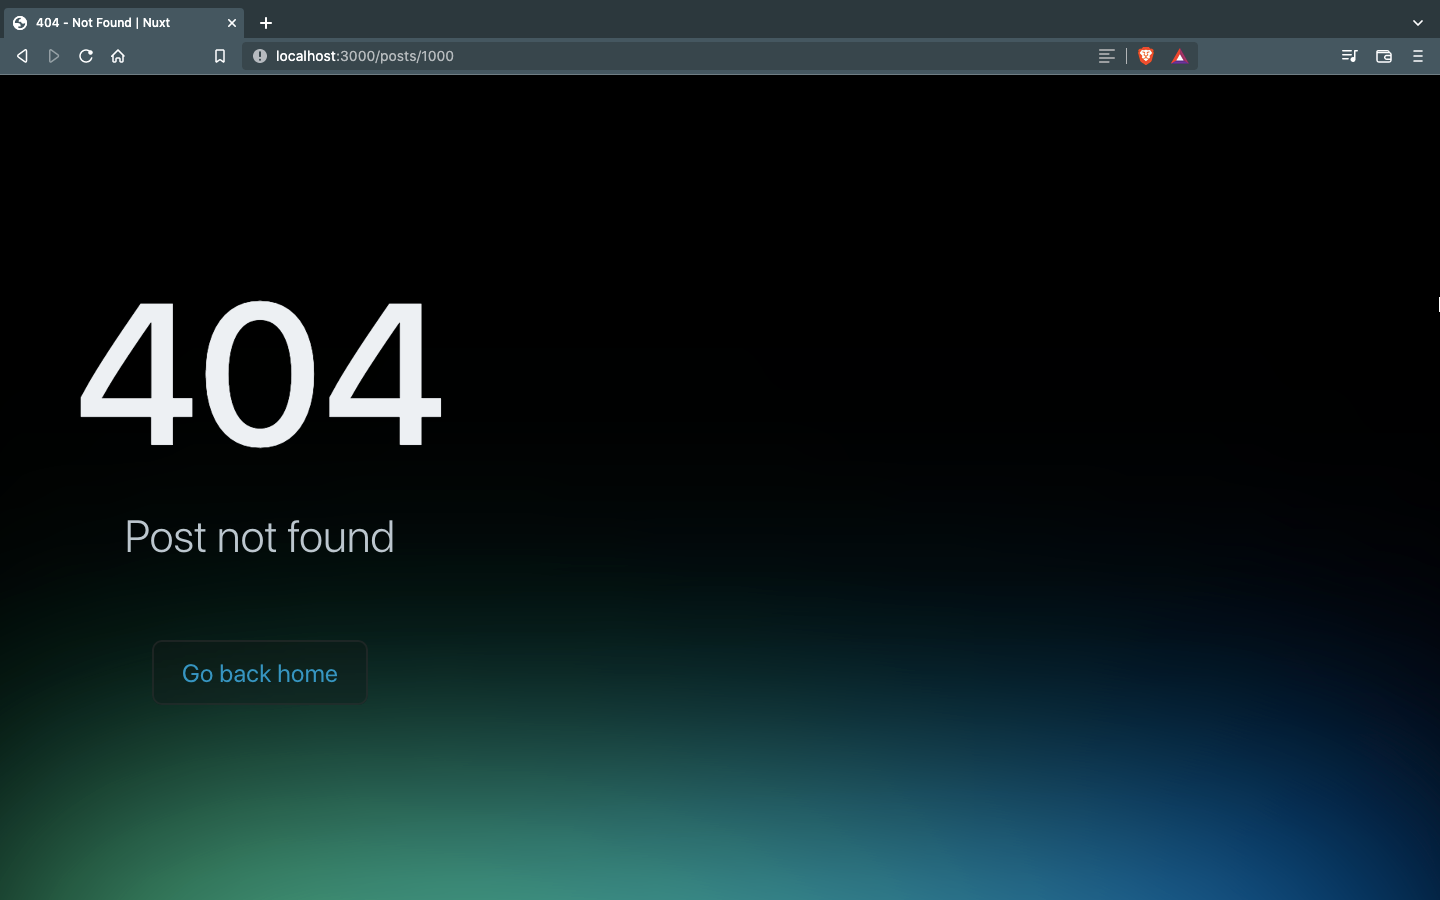 404 page with "Post not found" text